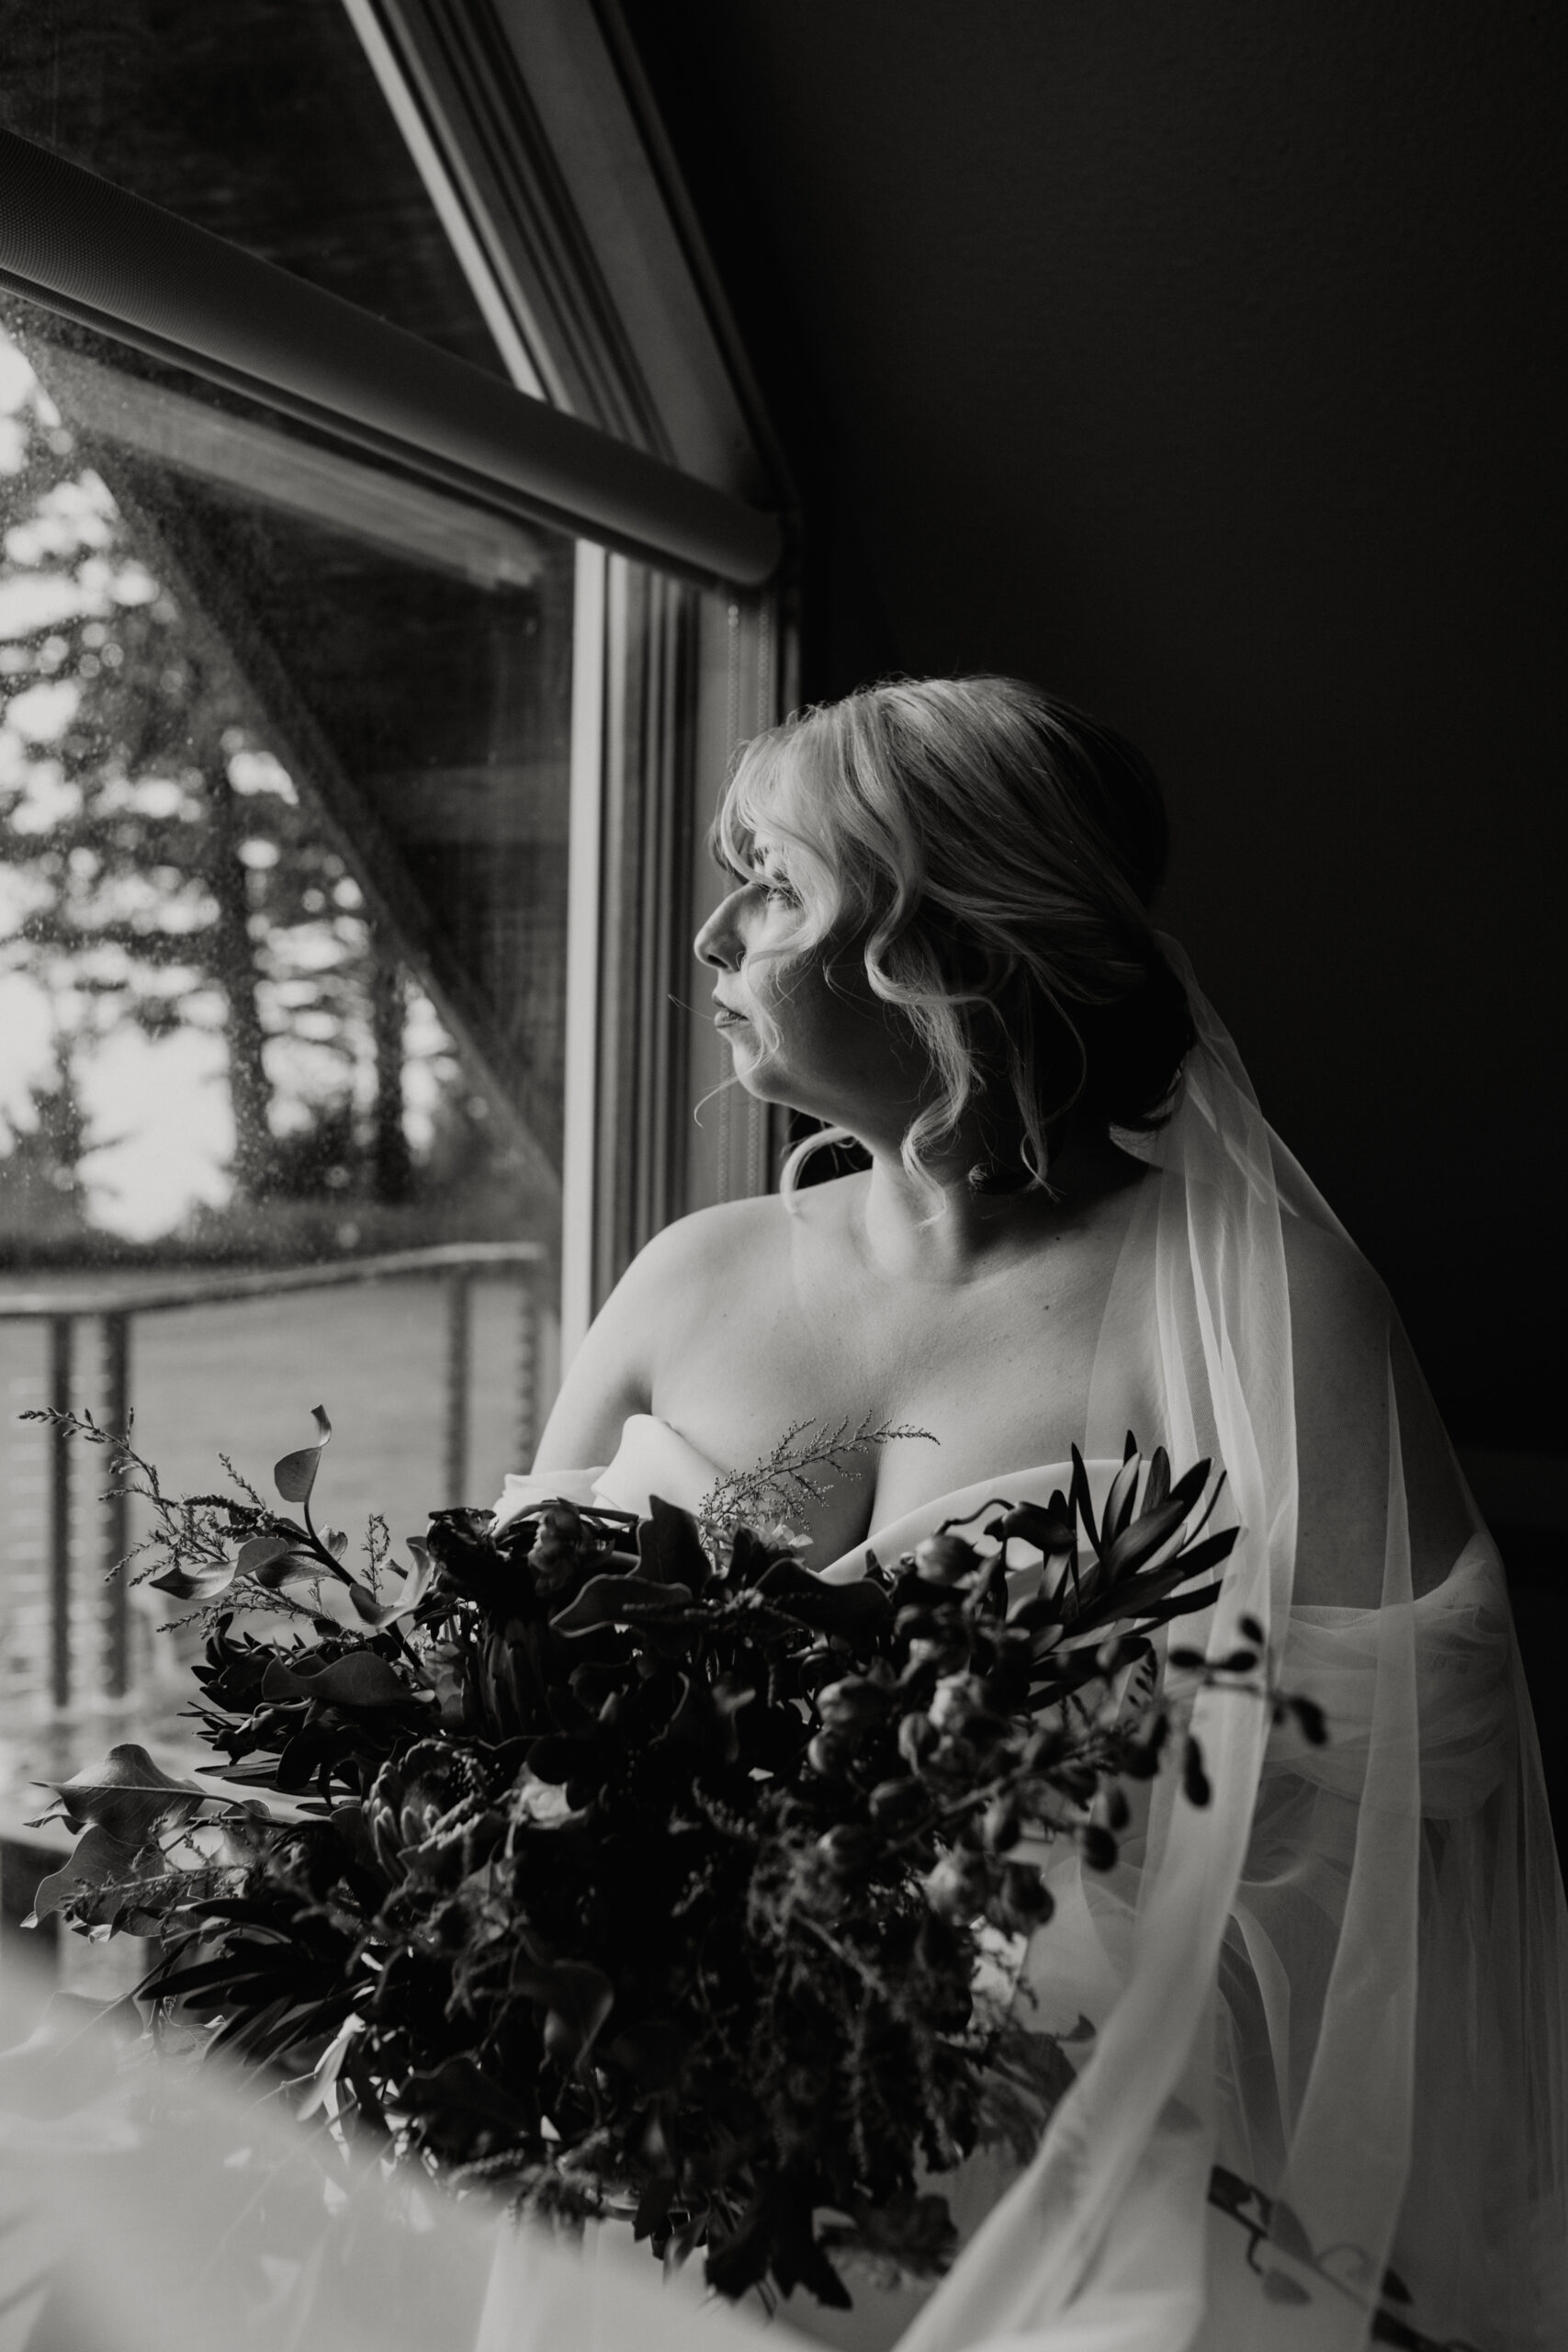 black and white photo of a bride holding bouquet of flowers looking out window 